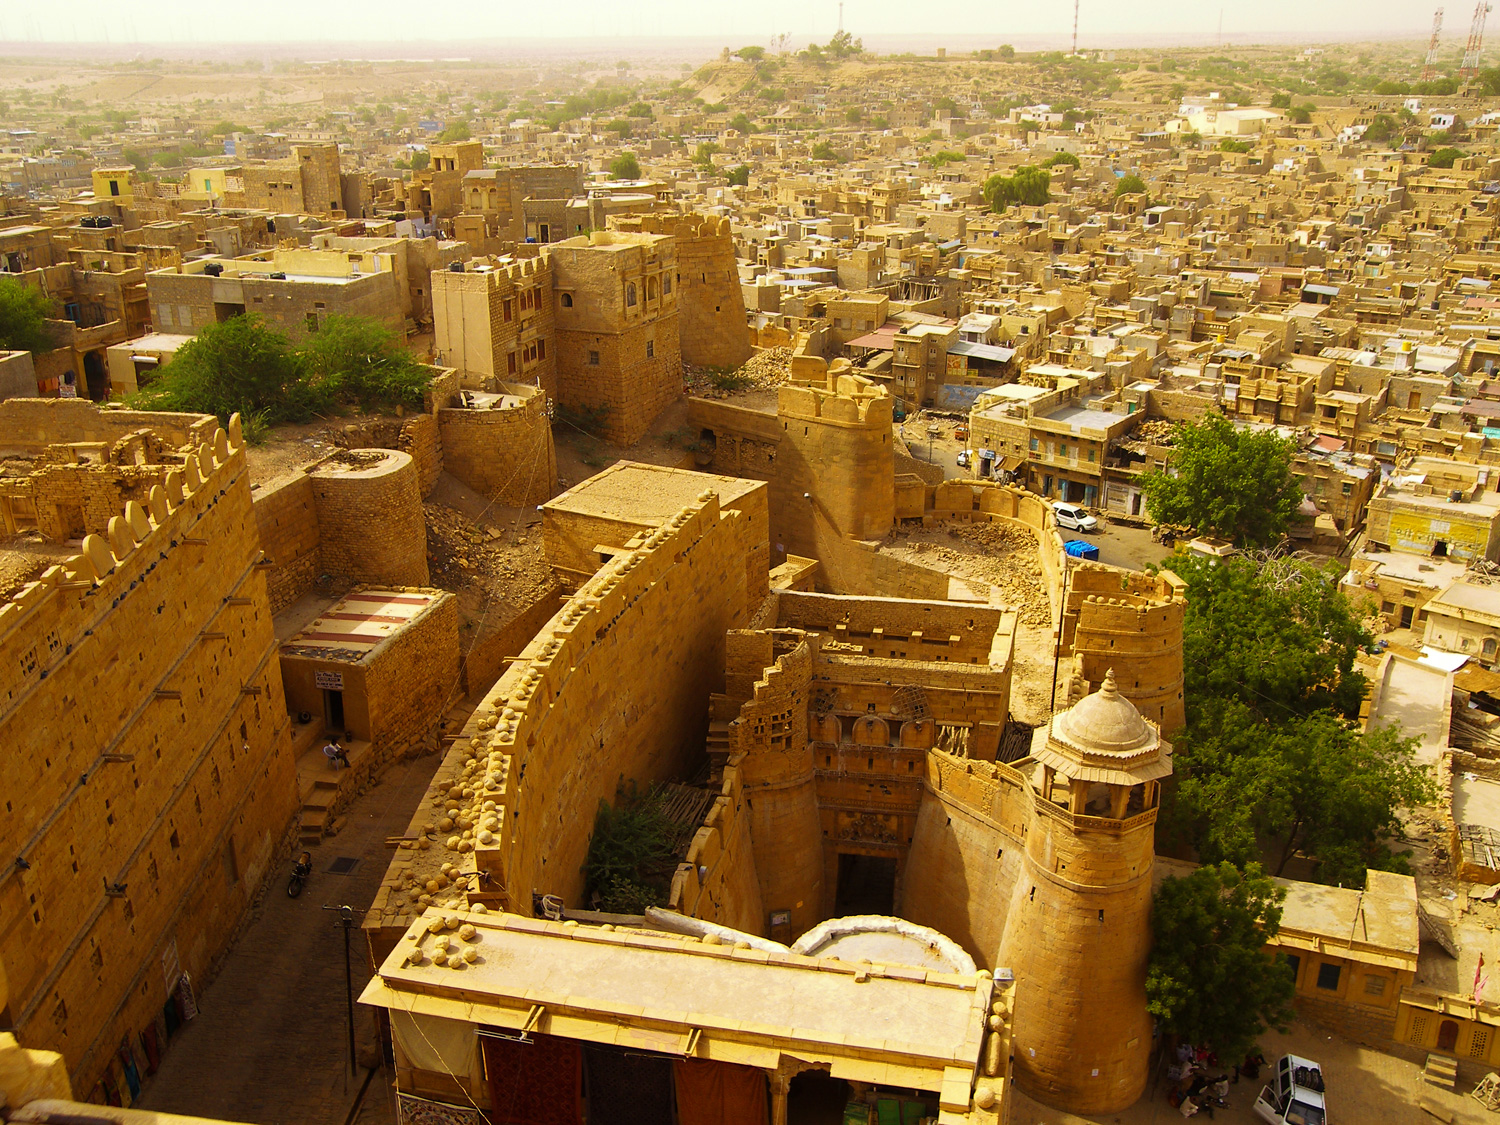 Jaisalmer Fort - Key Attractions, How to Reach, Timings - Cities